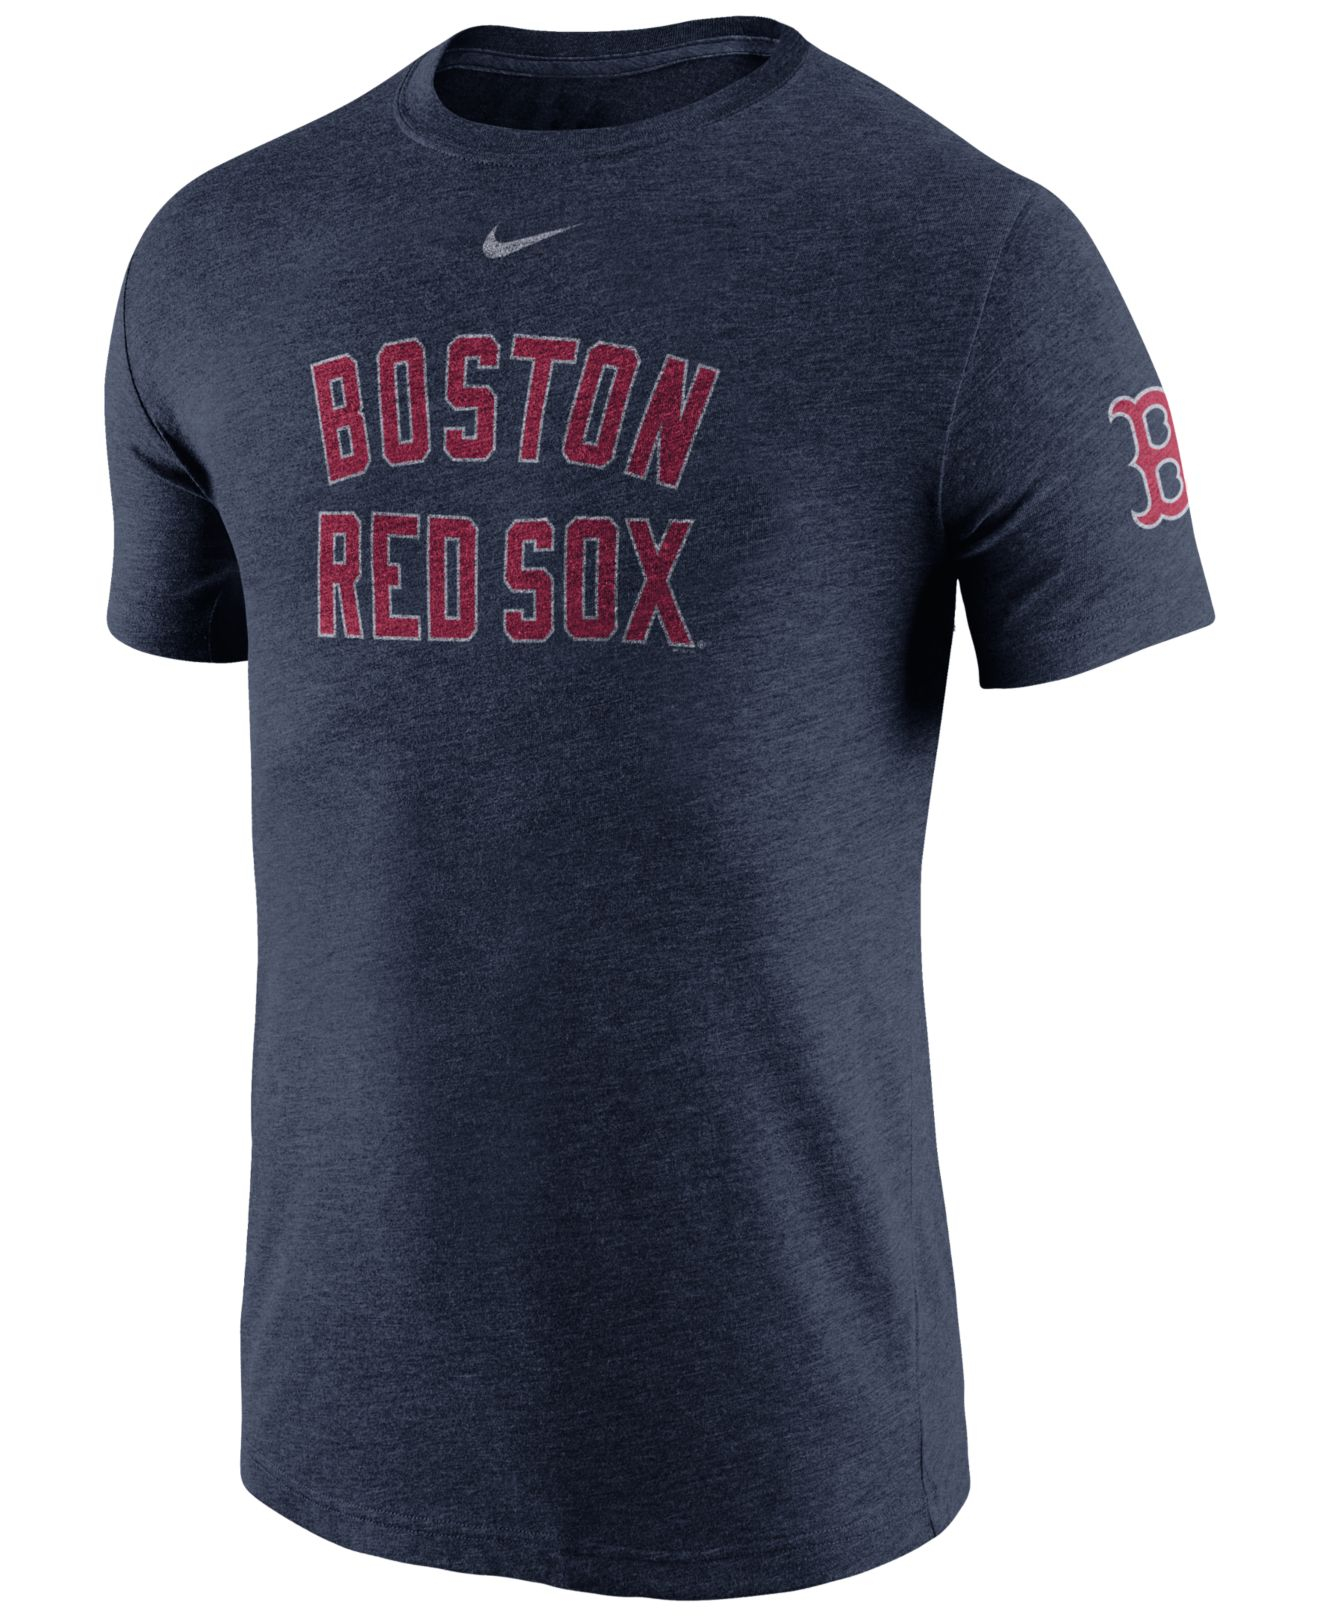 Nike Synthetic Men's Boston Red Sox Tri-blend Dna T-shirt in Navy (Blue ...